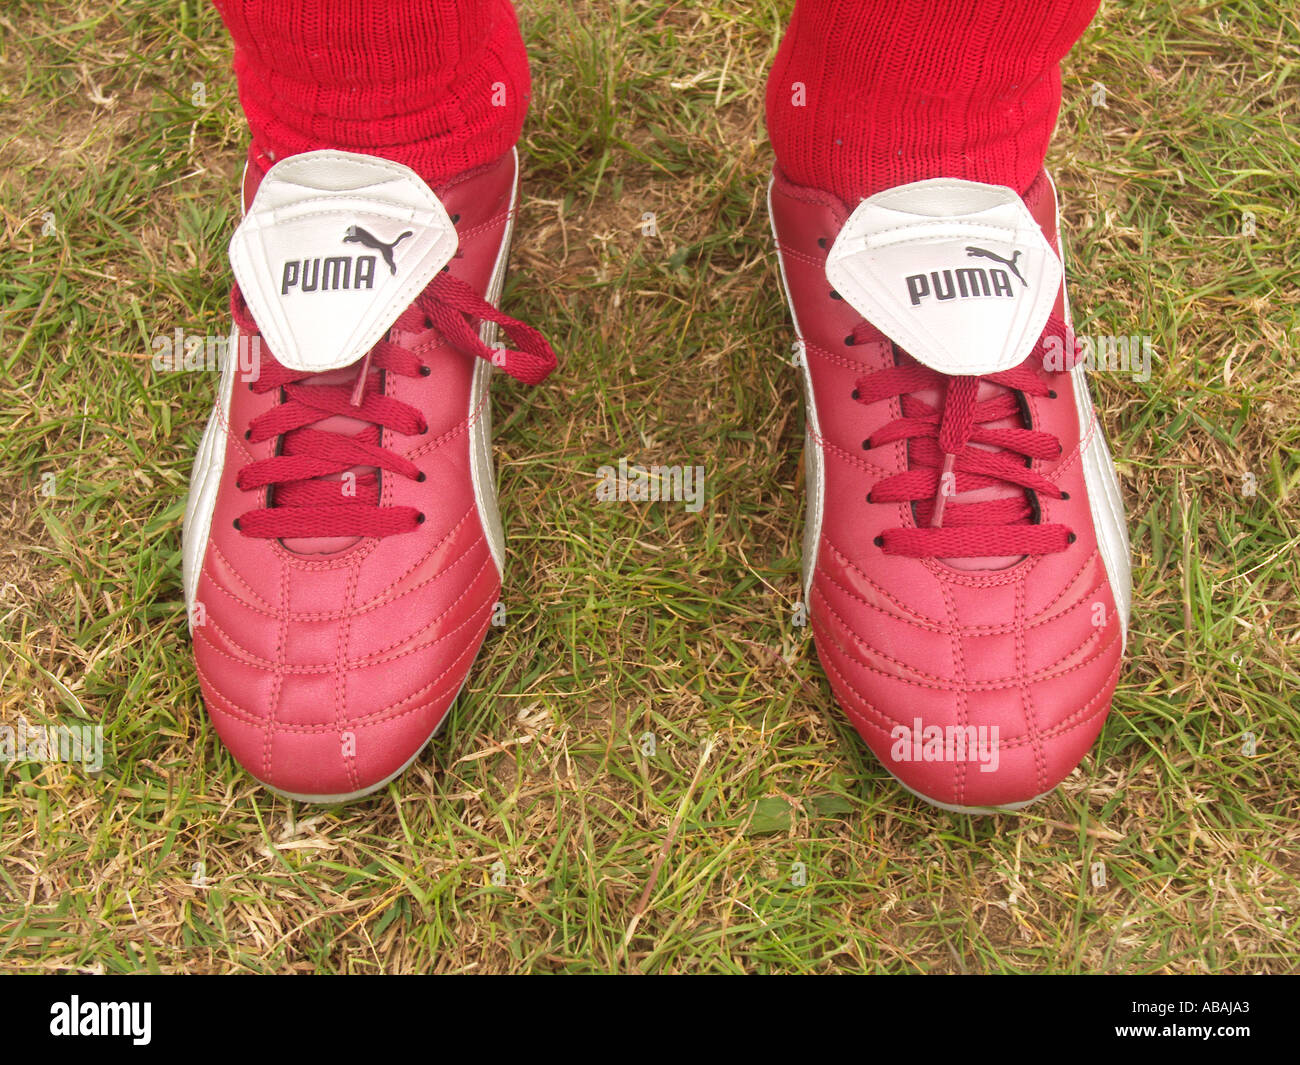 New red Puma football boots and red socks worn by child Stock Photo - Alamy